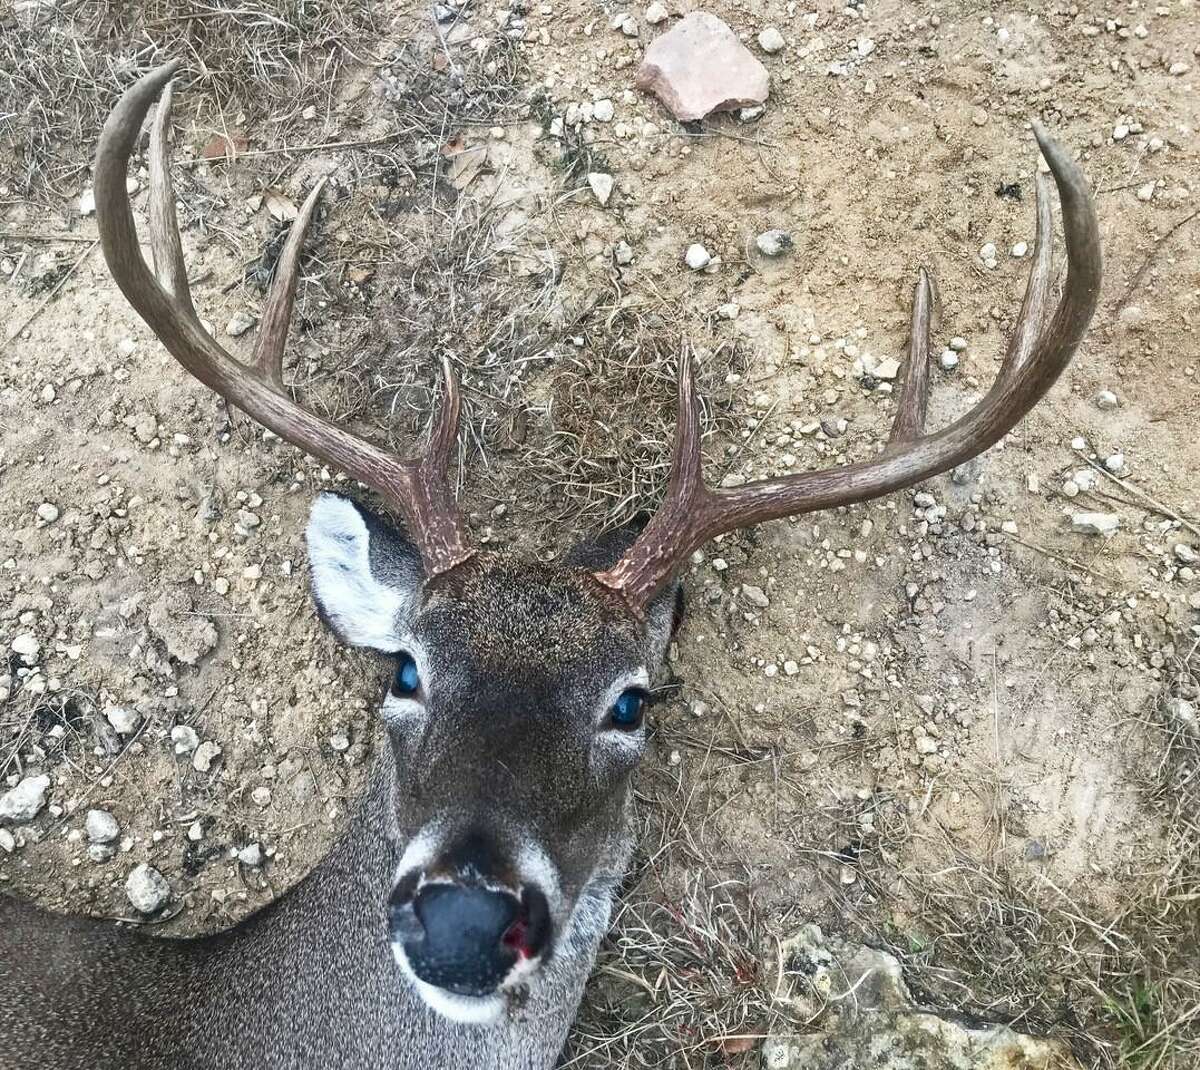 This buck with 18?…? -inch wide antlers, which had a dislocated left shoulder, appeared to have a much wider rack than the 19-incher because of its diminished body size from not being able to eat well.